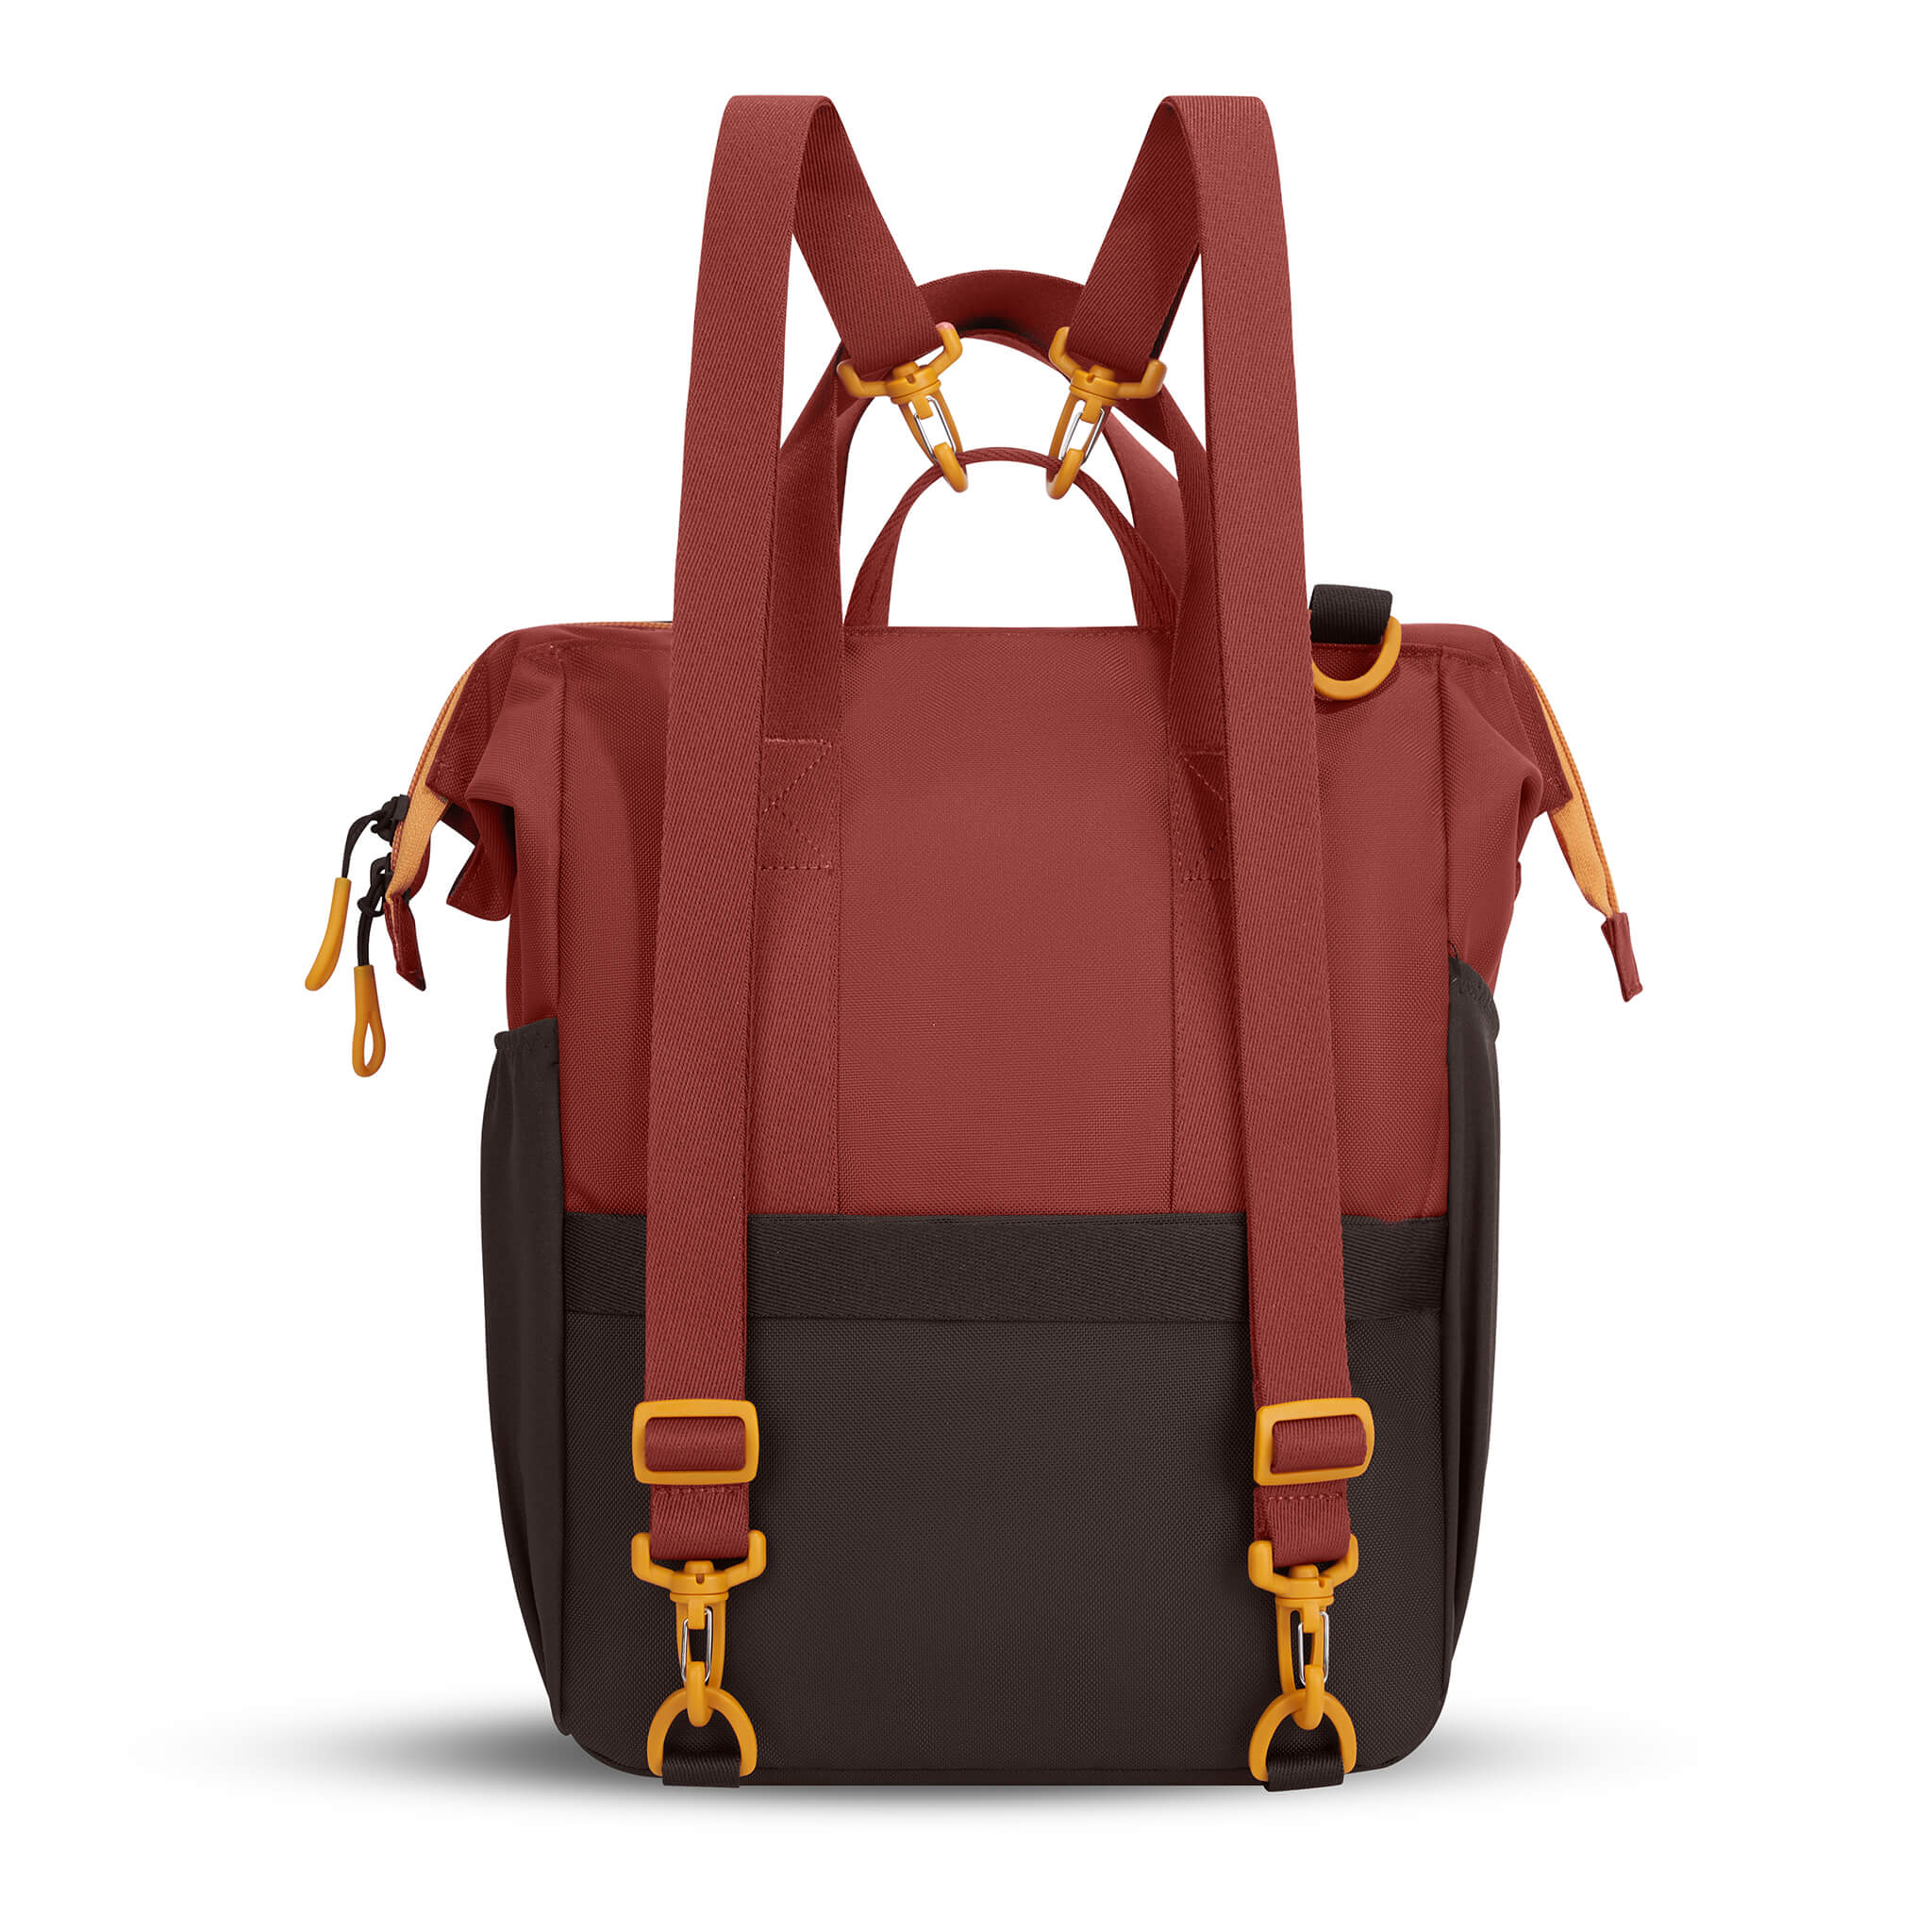 Back view of Sherpani convertible travel bag, the Dispatch in Cider. Dispatch features include external zipper pocket, three water bottle holders, fixed tote handles, removable straps, detachable straps, adjustable straps, padded laptop sleeve and a doctor bag opening. The Cider color is two-toned in burgundy and dark brown with accents in yellow. 